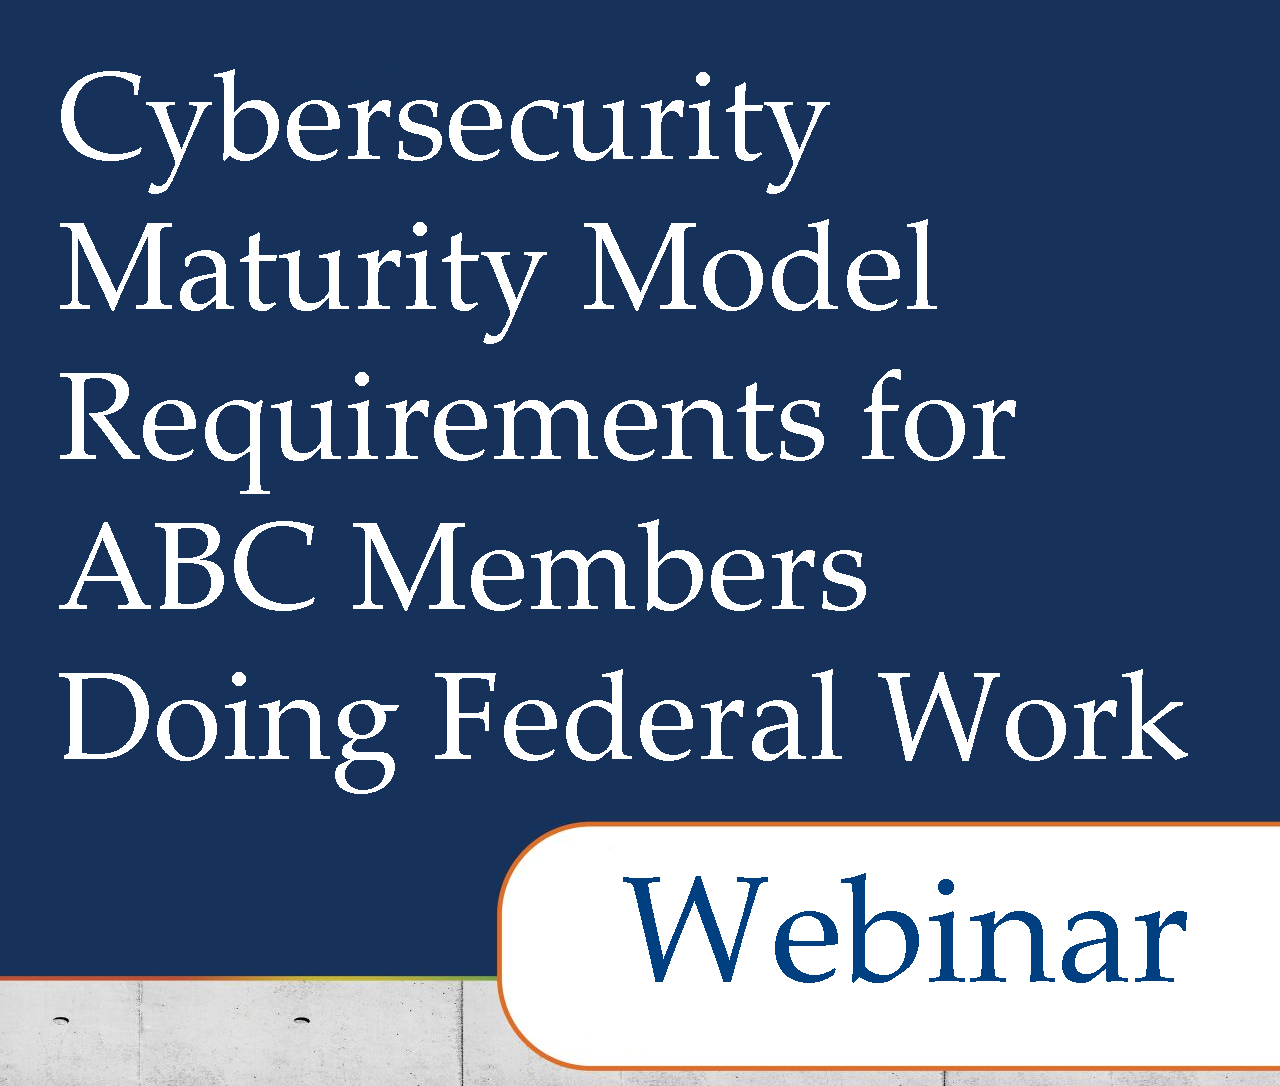 Cybersecurity Maturity Model Requirements for ABC Members Doing Federal Work